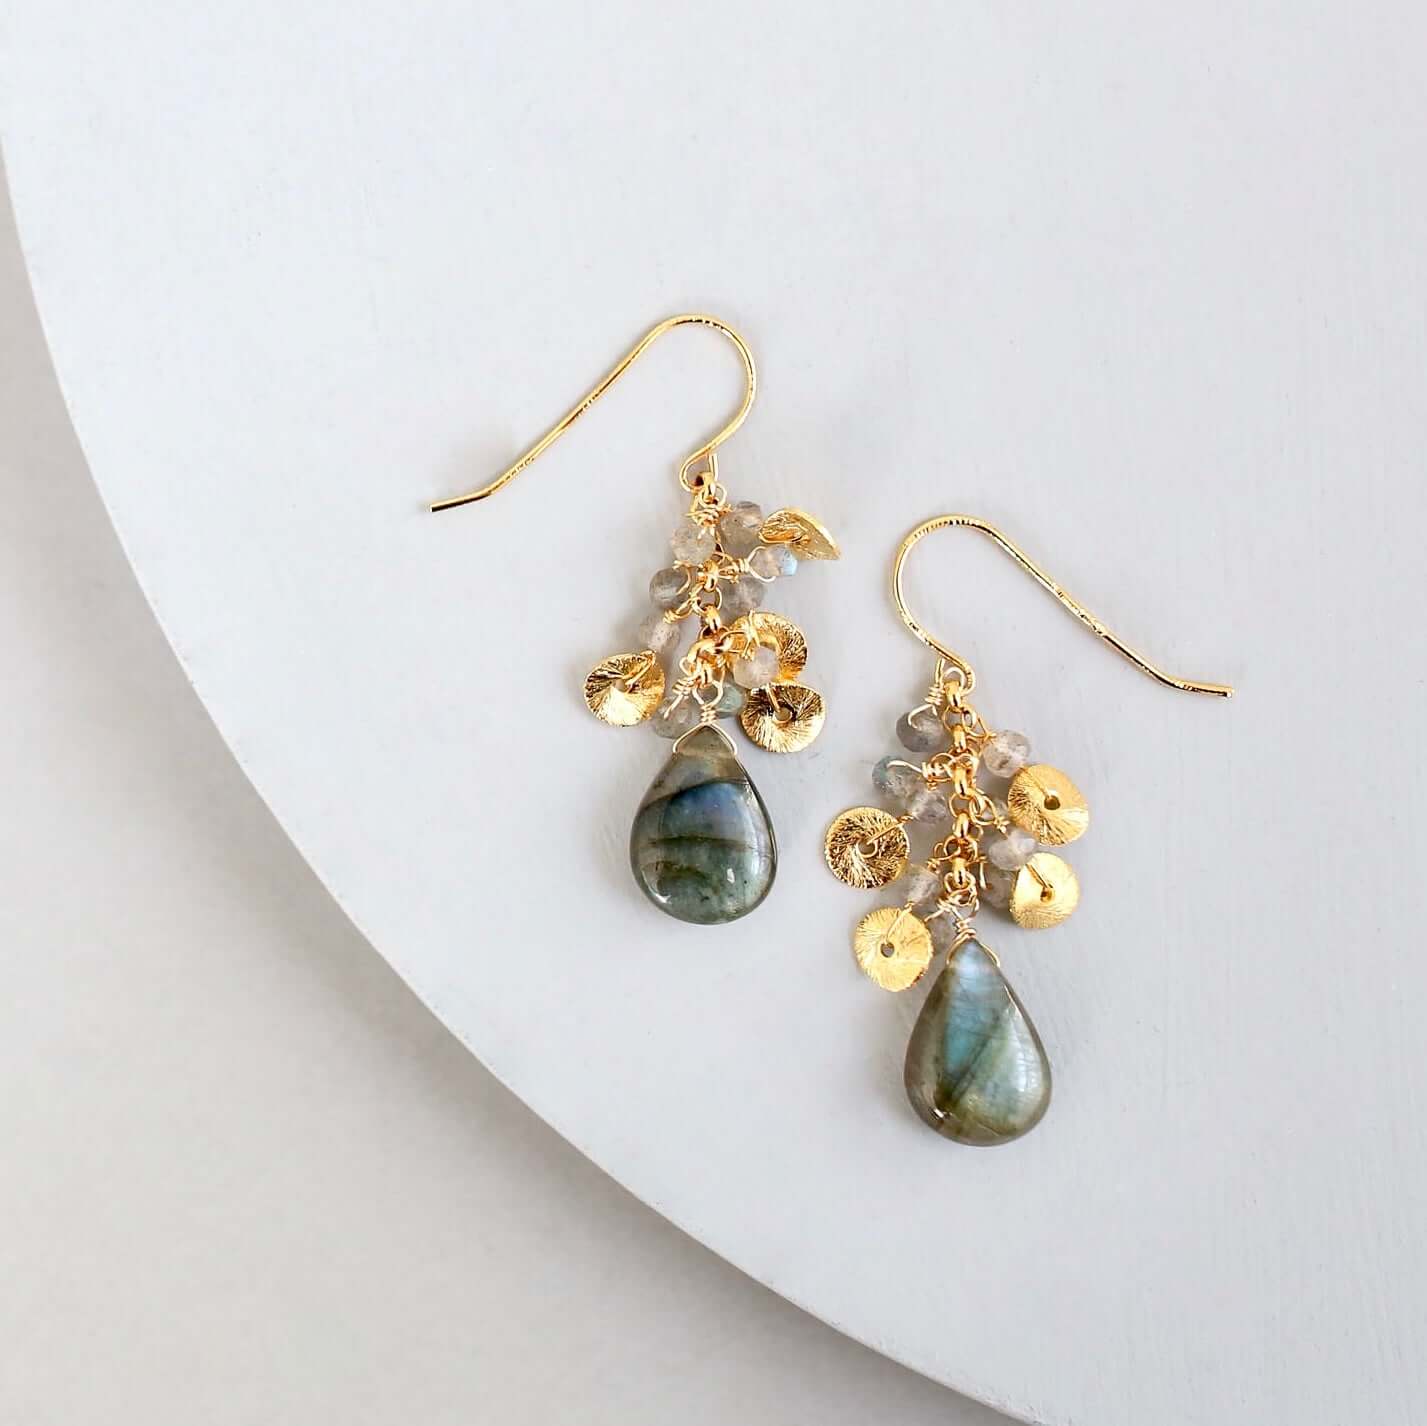  Labradorite Gemstone with mini stones  and Gold Accents   Gold Drop Earrings